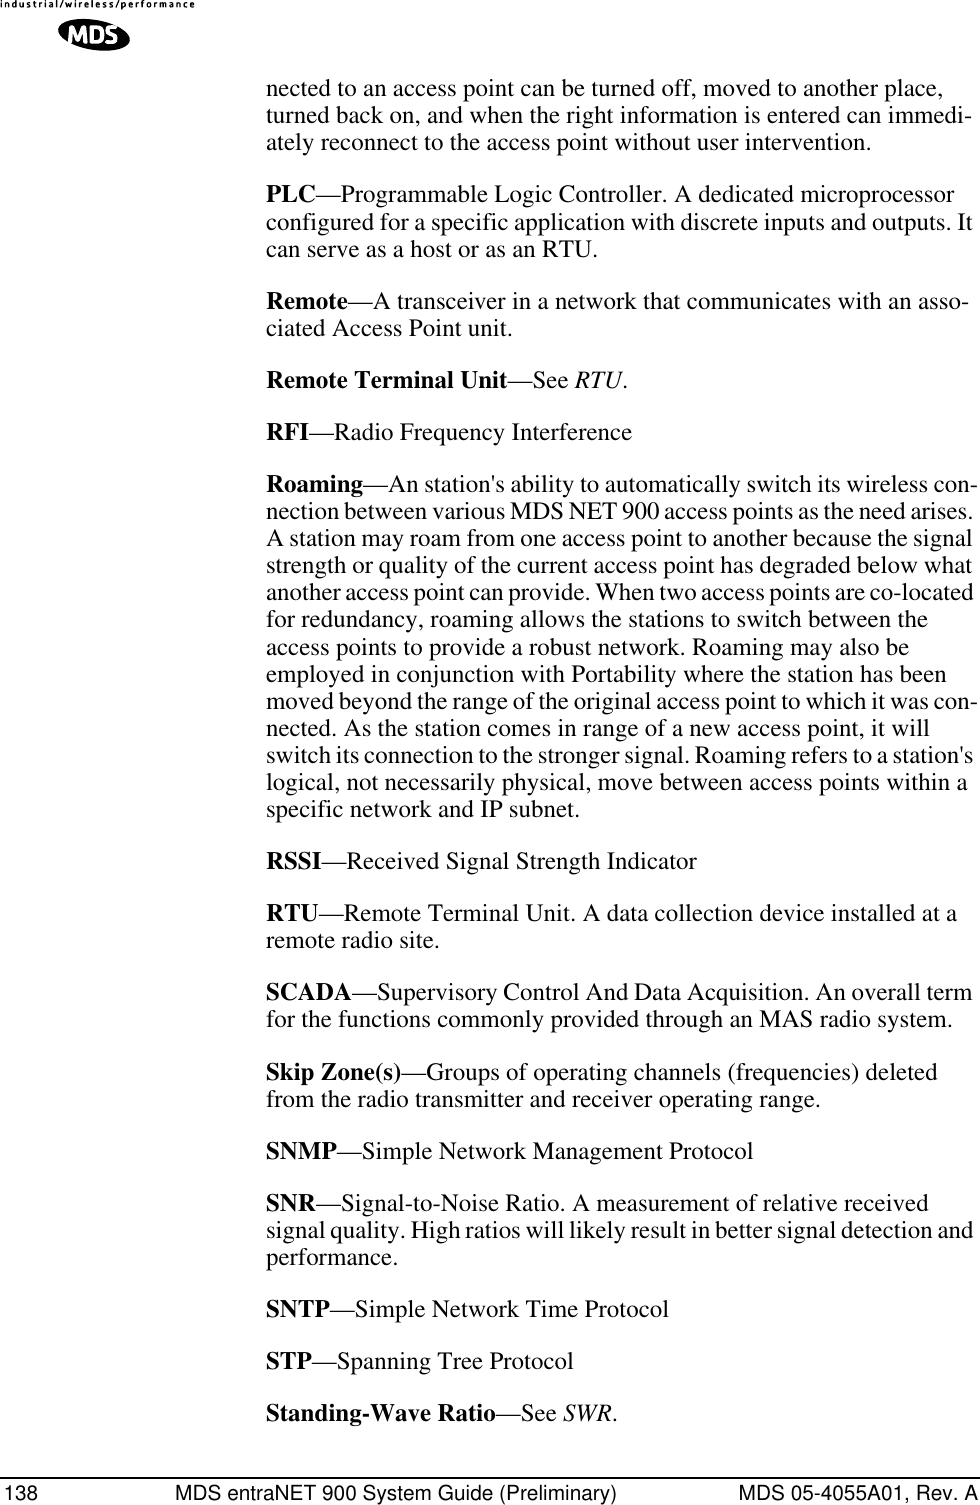 138 MDS entraNET 900 System Guide (Preliminary) MDS 05-4055A01, Rev. Anected to an access point can be turned off, moved to another place, turned back on, and when the right information is entered can immedi-ately reconnect to the access point without user intervention.PLC—Programmable Logic Controller. A dedicated microprocessor configured for a specific application with discrete inputs and outputs. It can serve as a host or as an RTU.Remote—A transceiver in a network that communicates with an asso-ciated Access Point unit.Remote Terminal Unit—See RTU.RFI—Radio Frequency InterferenceRoaming—An station&apos;s ability to automatically switch its wireless con-nection between various MDS NET 900 access points as the need arises. A station may roam from one access point to another because the signal strength or quality of the current access point has degraded below what another access point can provide. When two access points are co-located for redundancy, roaming allows the stations to switch between the access points to provide a robust network. Roaming may also be employed in conjunction with Portability where the station has been moved beyond the range of the original access point to which it was con-nected. As the station comes in range of a new access point, it will switch its connection to the stronger signal. Roaming refers to a station&apos;s logical, not necessarily physical, move between access points within a specific network and IP subnet.RSSI—Received Signal Strength IndicatorRTU—Remote Terminal Unit. A data collection device installed at a remote radio site.SCADA—Supervisory Control And Data Acquisition. An overall term for the functions commonly provided through an MAS radio system.Skip Zone(s)—Groups of operating channels (frequencies) deleted from the radio transmitter and receiver operating range.SNMP—Simple Network Management ProtocolSNR—Signal-to-Noise Ratio. A measurement of relative received signal quality. High ratios will likely result in better signal detection and performance.SNTP—Simple Network Time ProtocolSTP—Spanning Tree ProtocolStanding-Wave Ratio—See SWR.